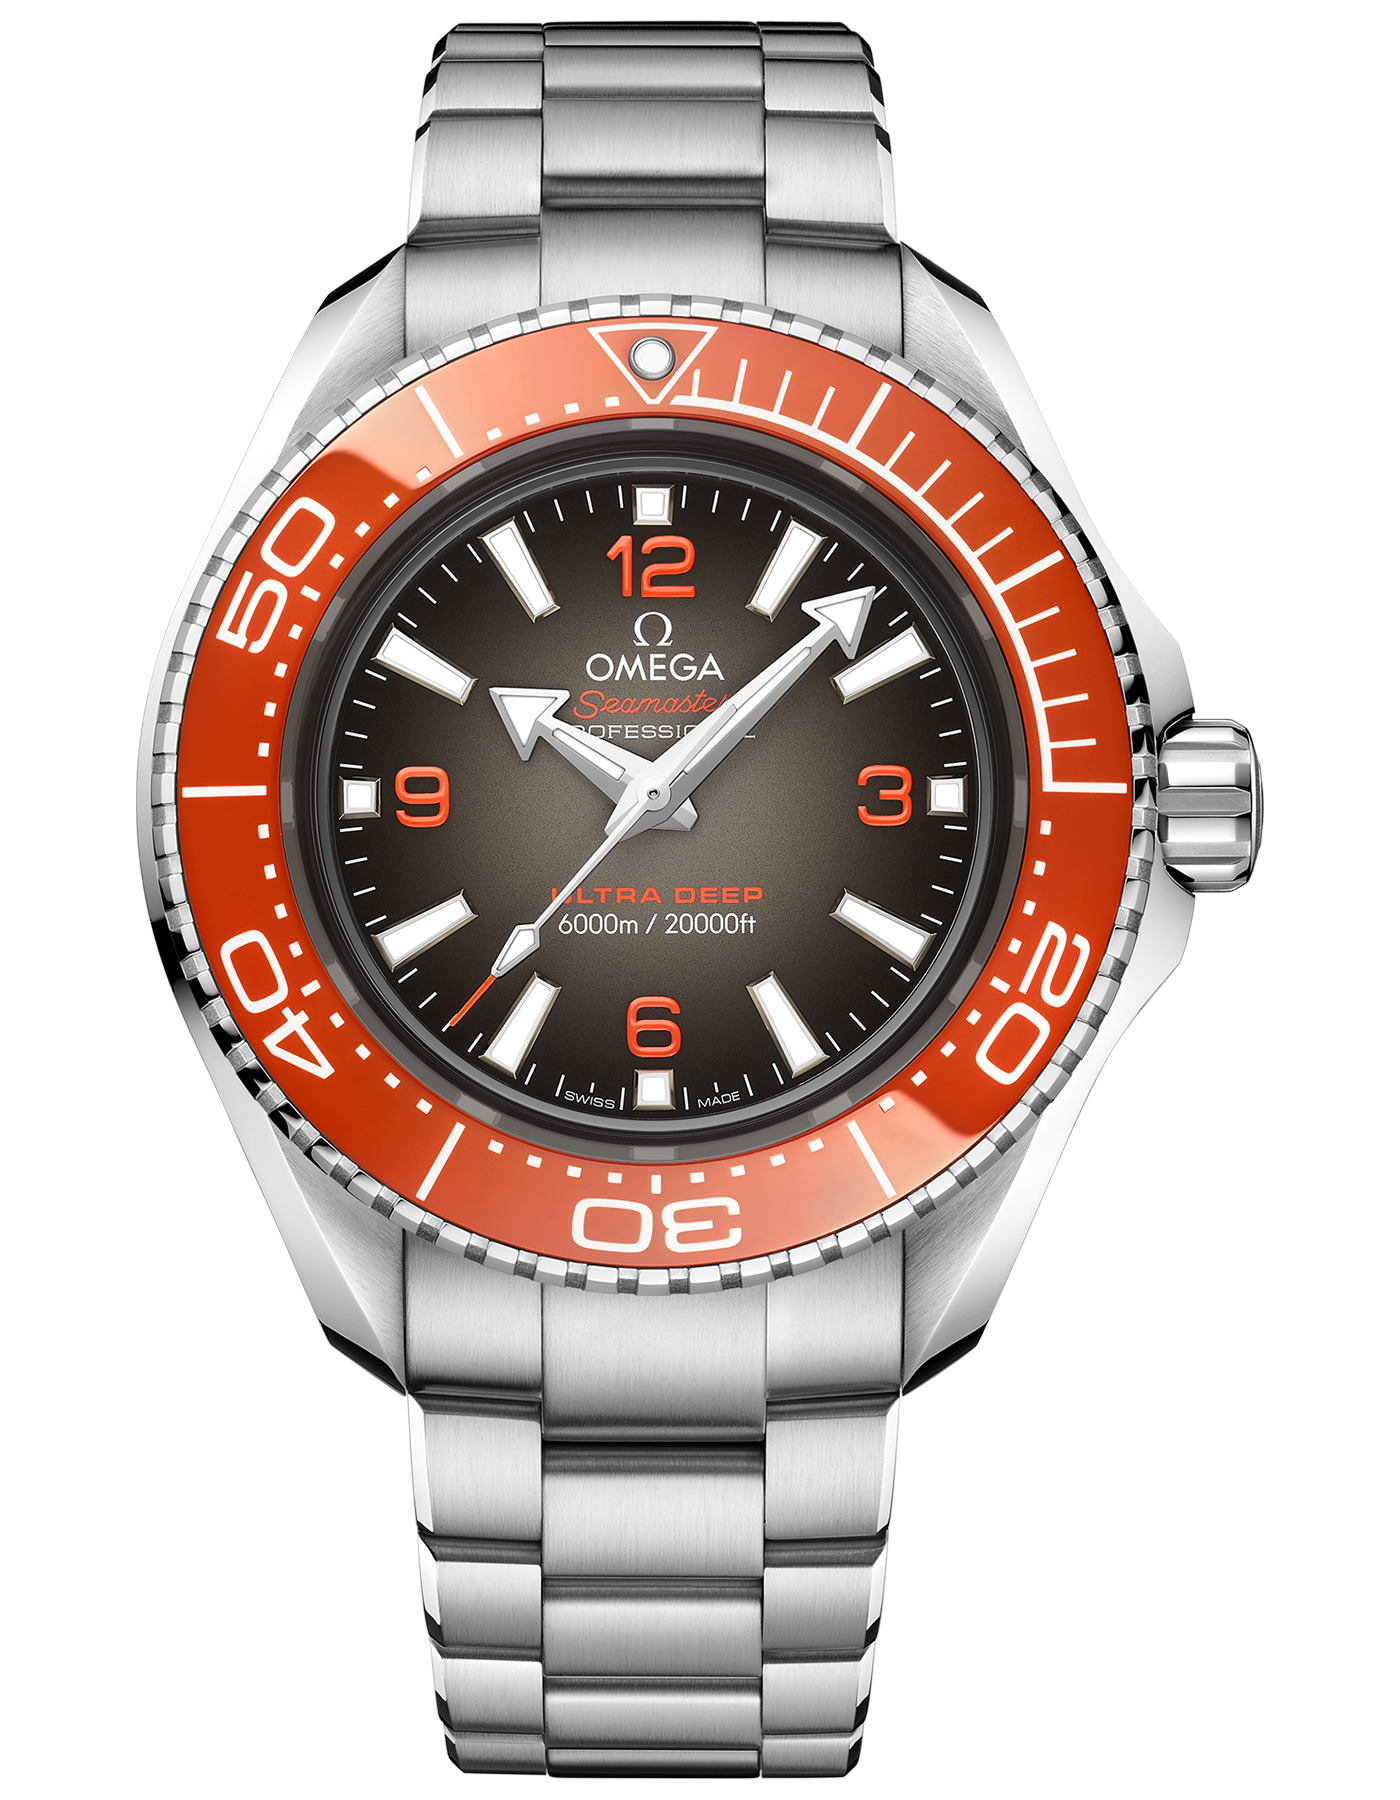 SEAMASTER PLANET OCEAN 6000M CO‑AXIAL MASTER CHRONOMETER 45.5 MM "Ultra Deep"